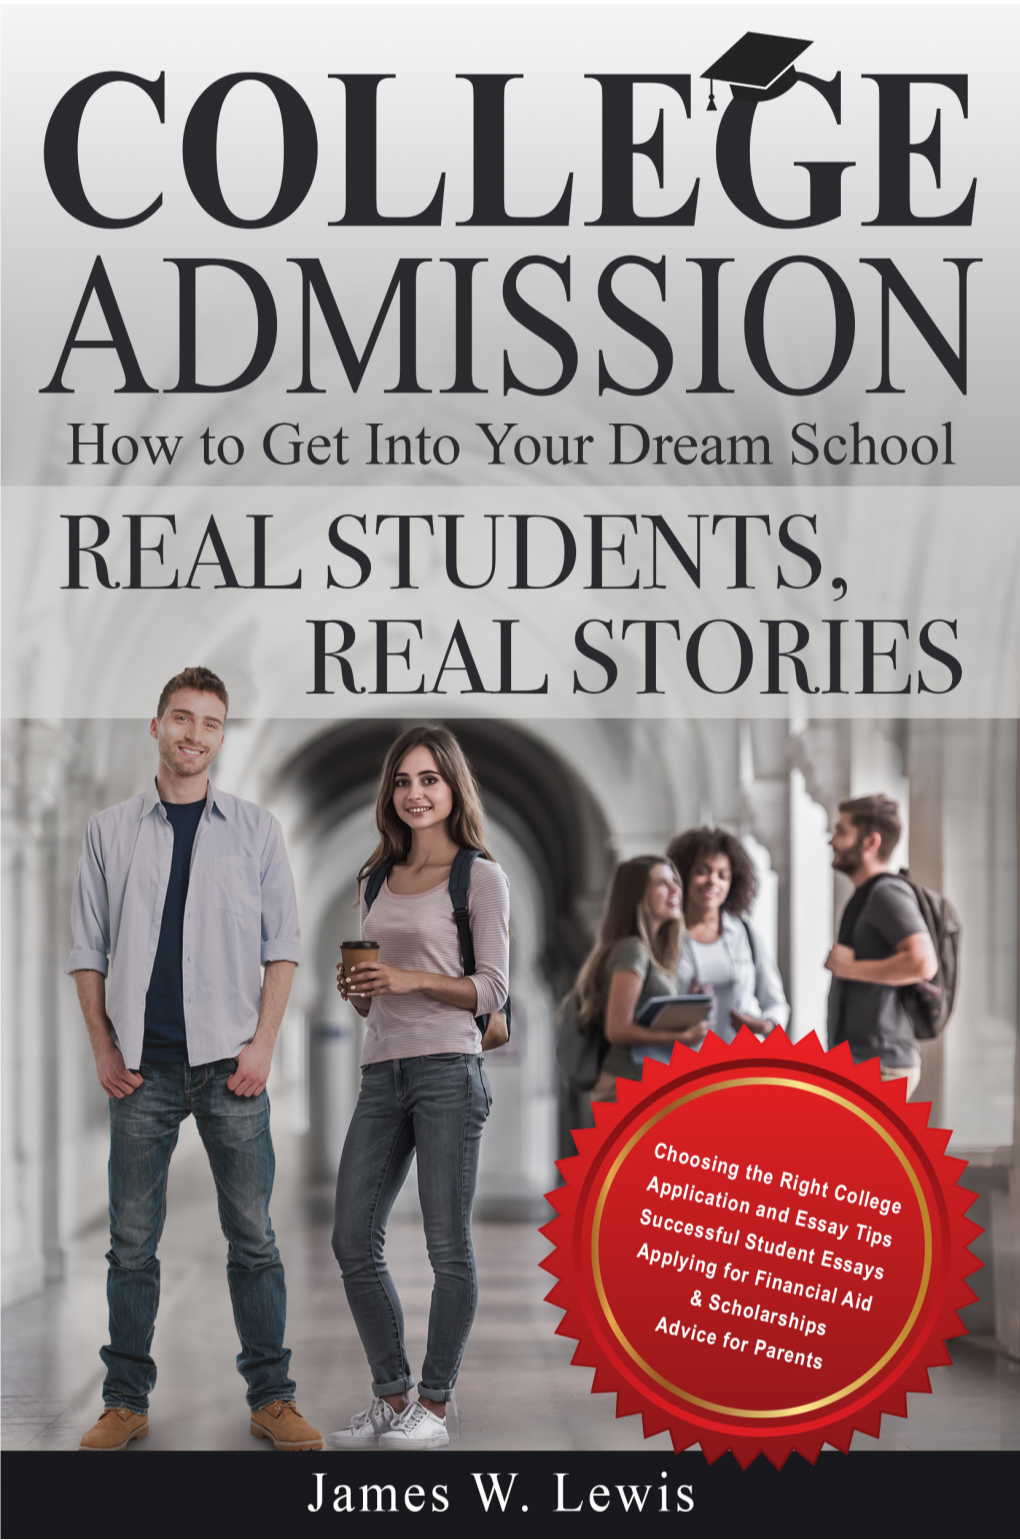 College Admission: How to Get Into Your Dream School—Real Students, Real Stories